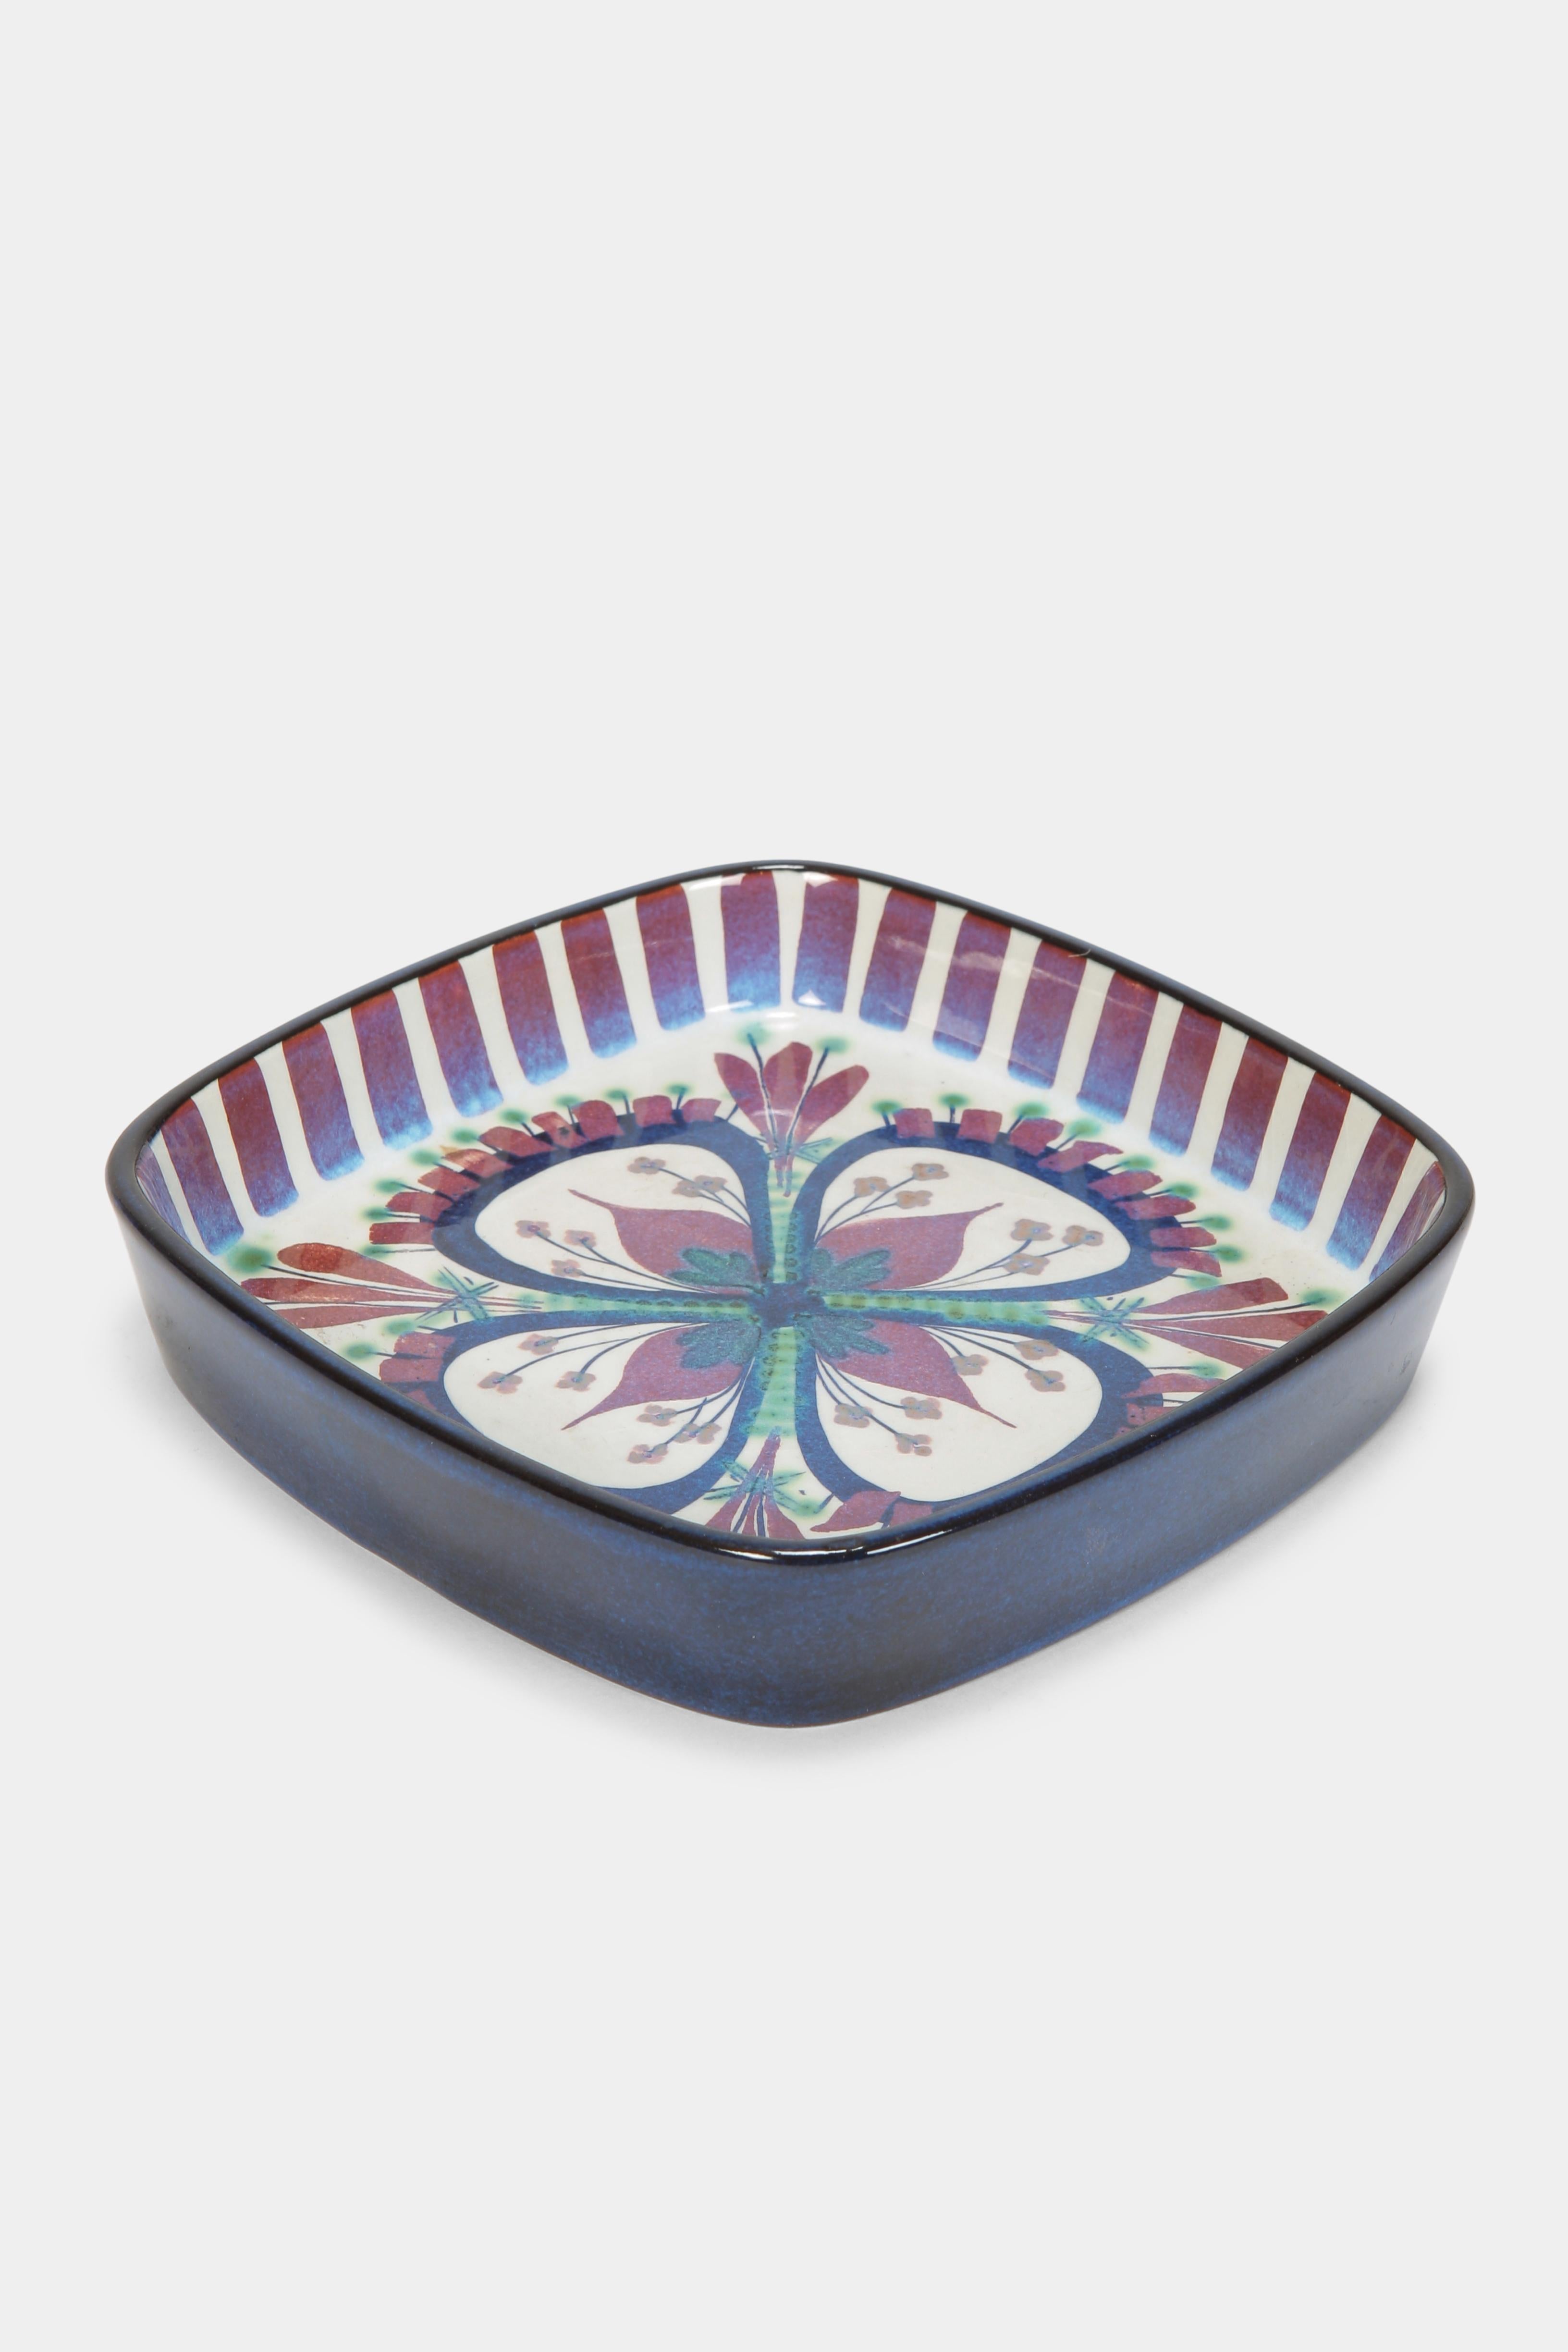 Marianne Johnson bowl manufactured by Royal Copenhagen in the 1969 in Denmark. Ceramic bowl colored with intensive shades, illuminating details and fluid transitions. Marked on the bottom with the initials of the designer and the number 174/2883.